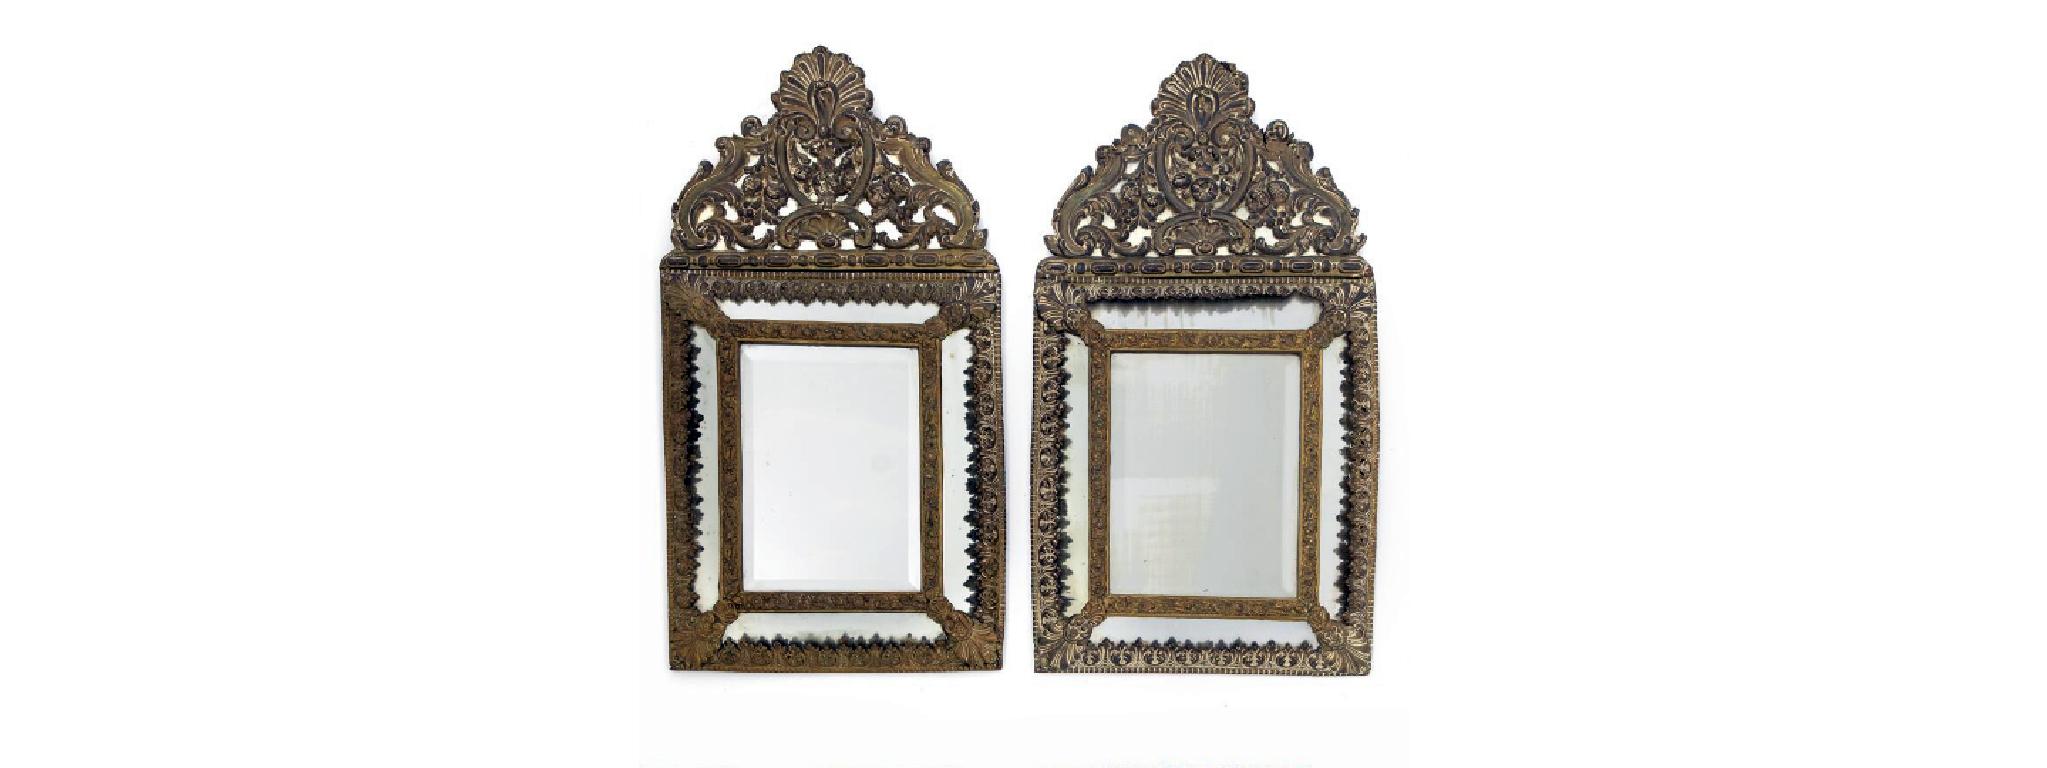 Baroque Revival Decorative Pair of Gilded Antique Flemish Mirrors, Europe 19th Century For Sale